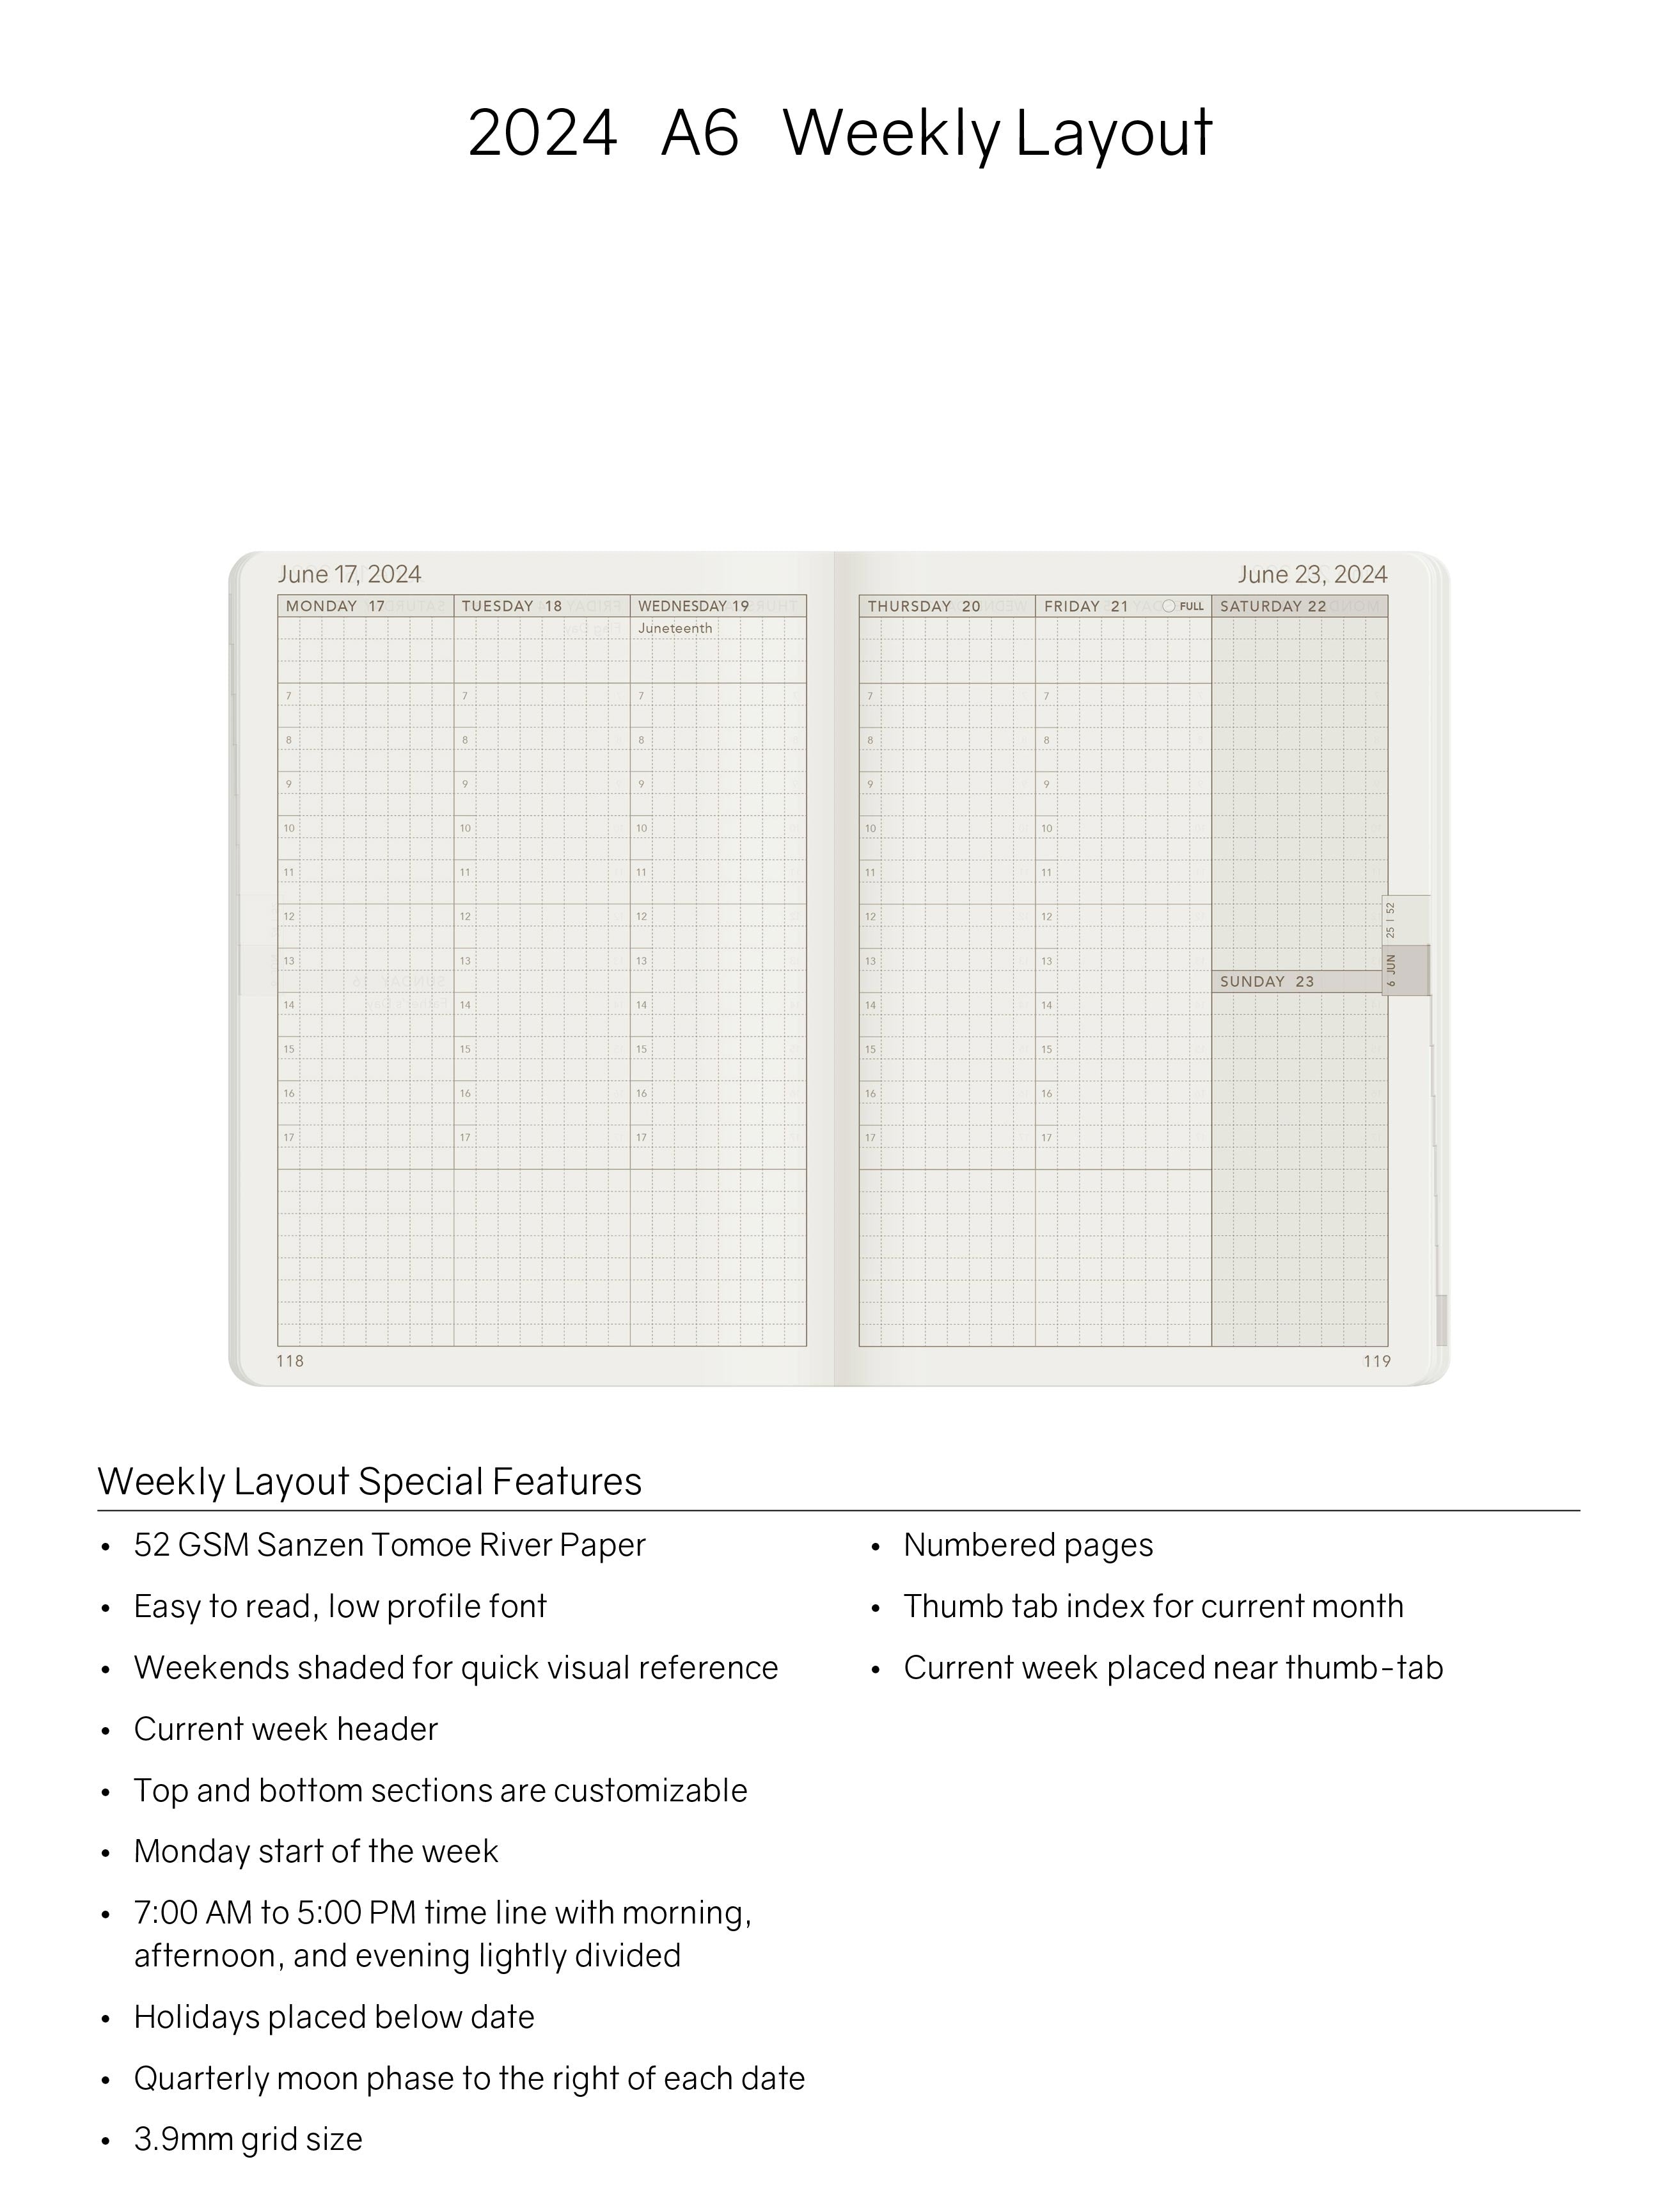 2024 A6 Weekly Planner - Evergreen (Dark Green)- 52gsm Tomoe River Paper (Stacked Weekends)